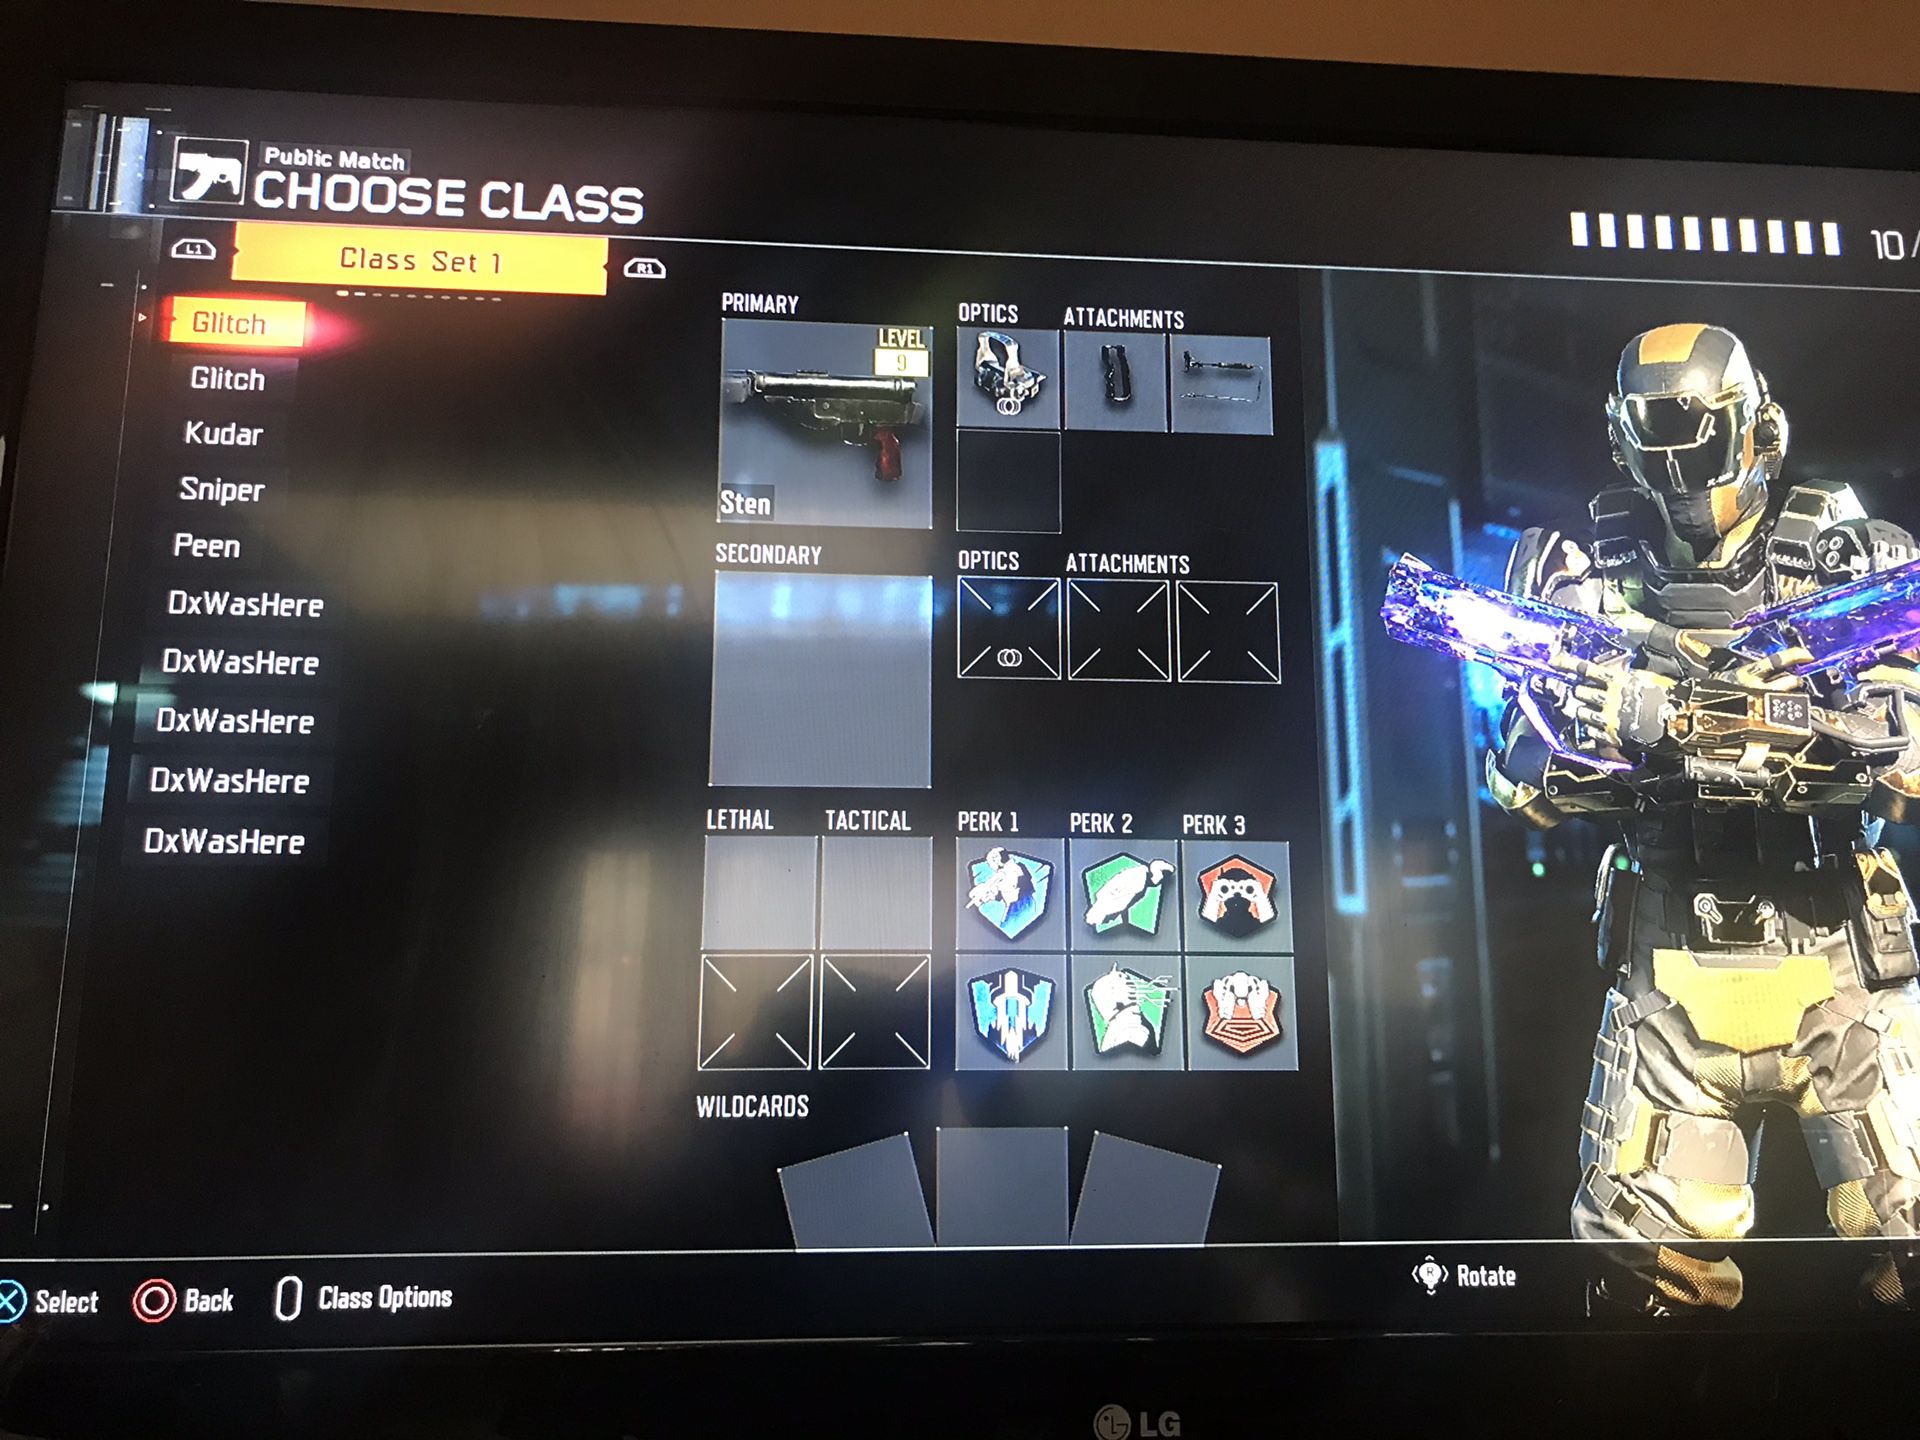 Call of duty black ops ps4 modded account for in NY - OfferUp